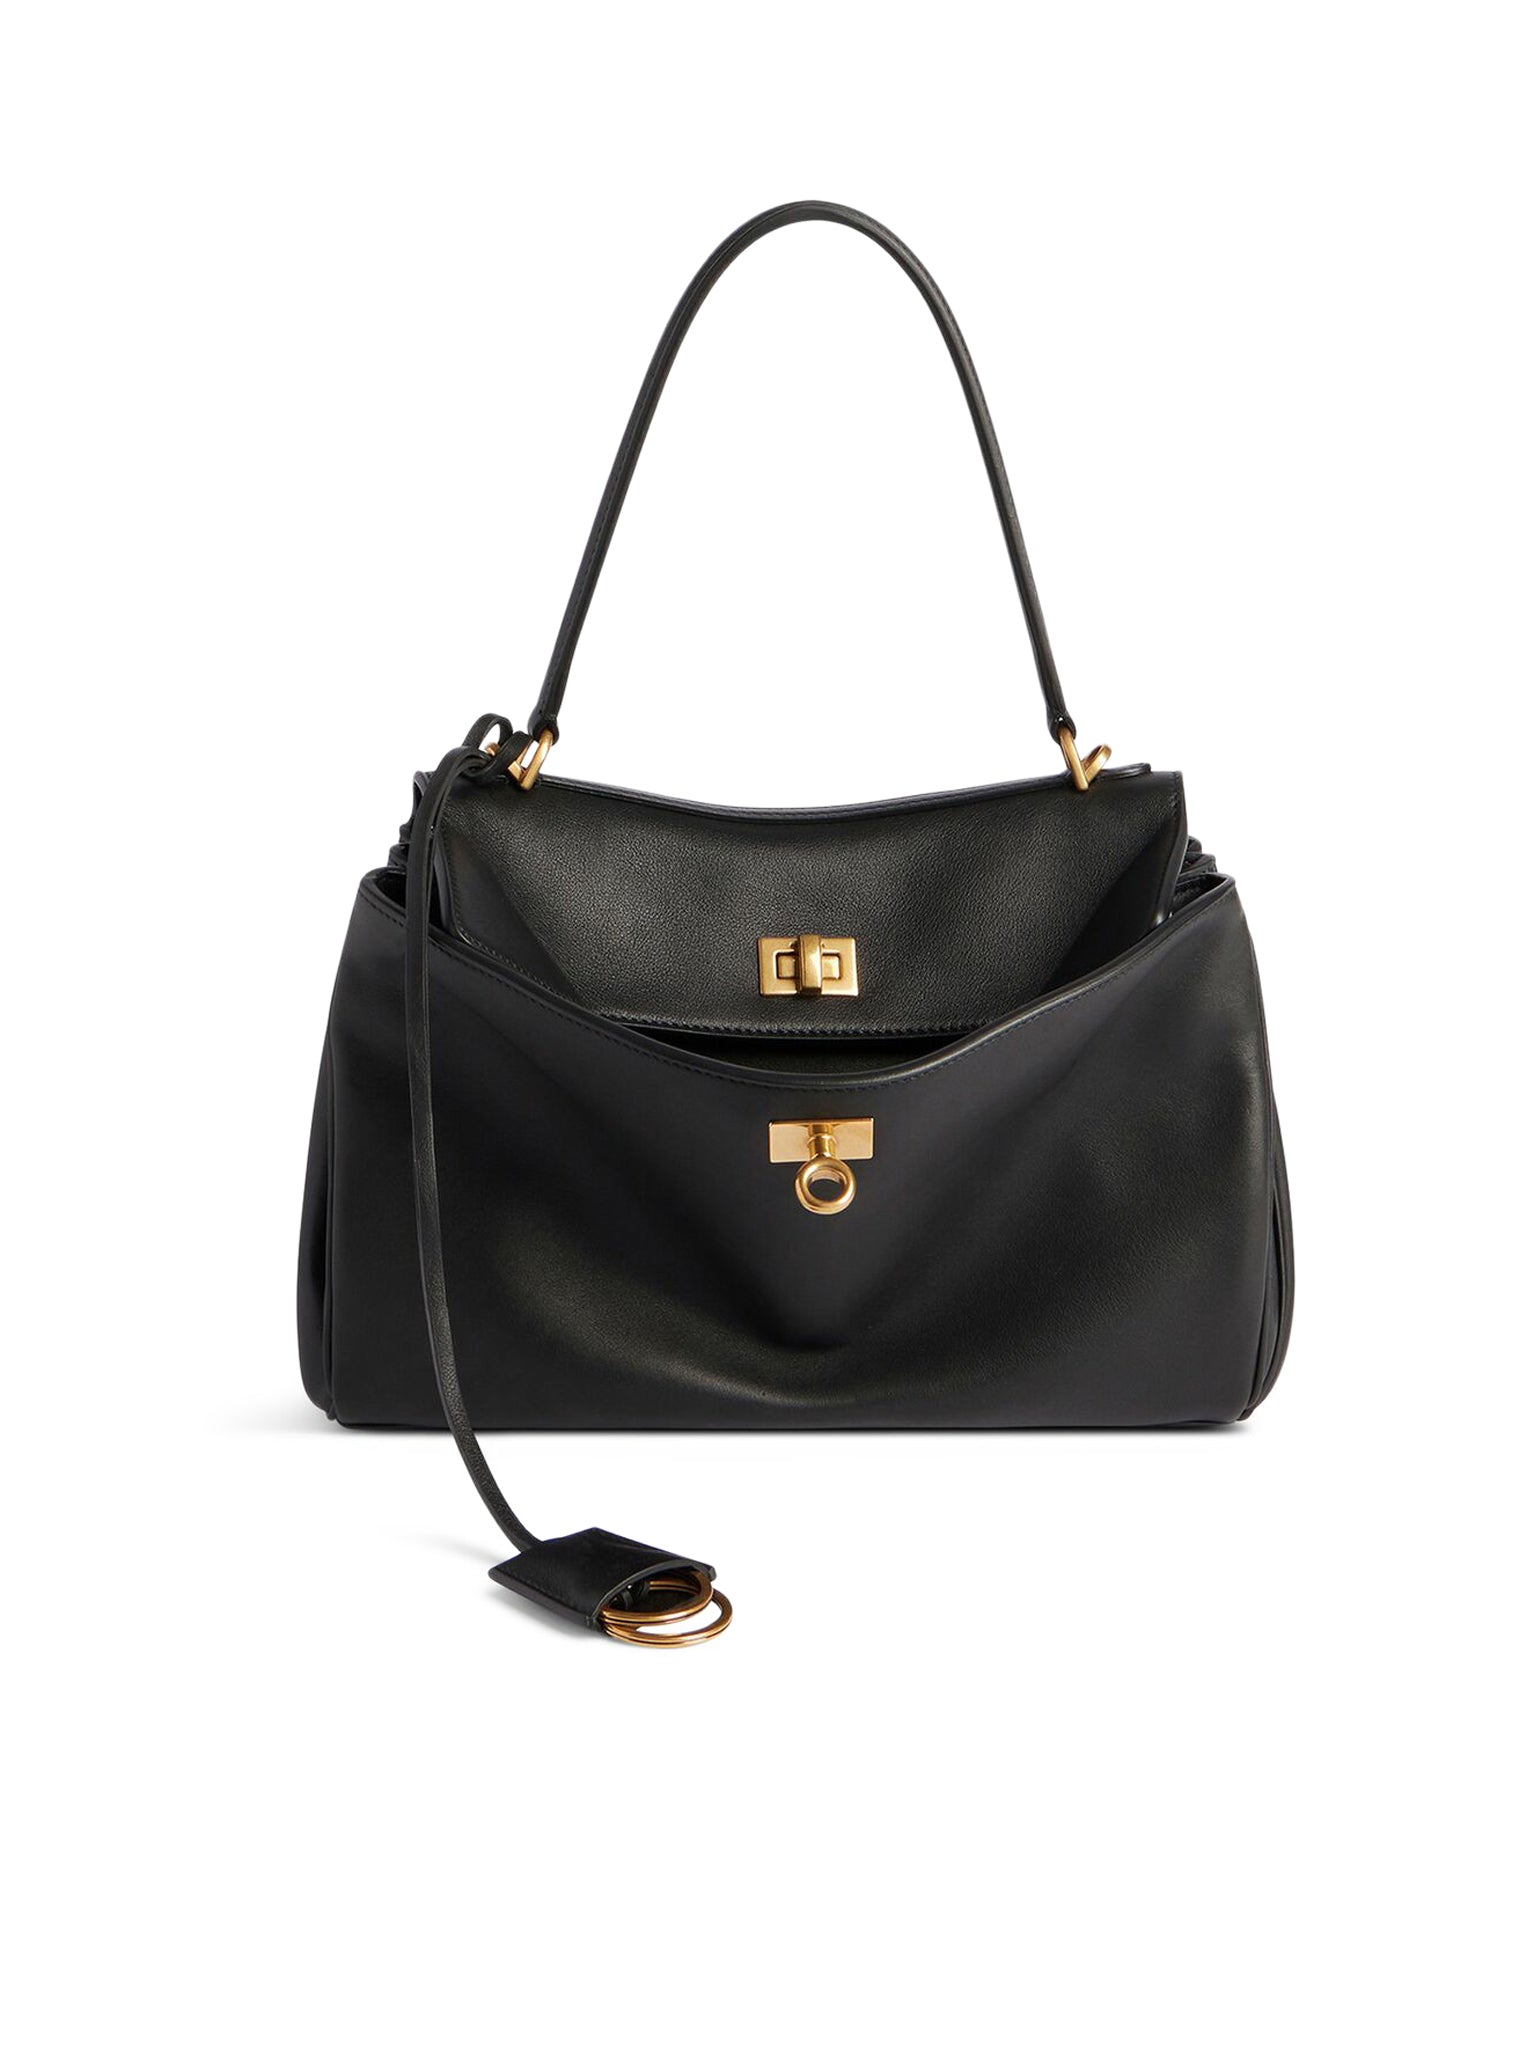 SMALL RODEO BAG FOR WOMEN IN BLACK